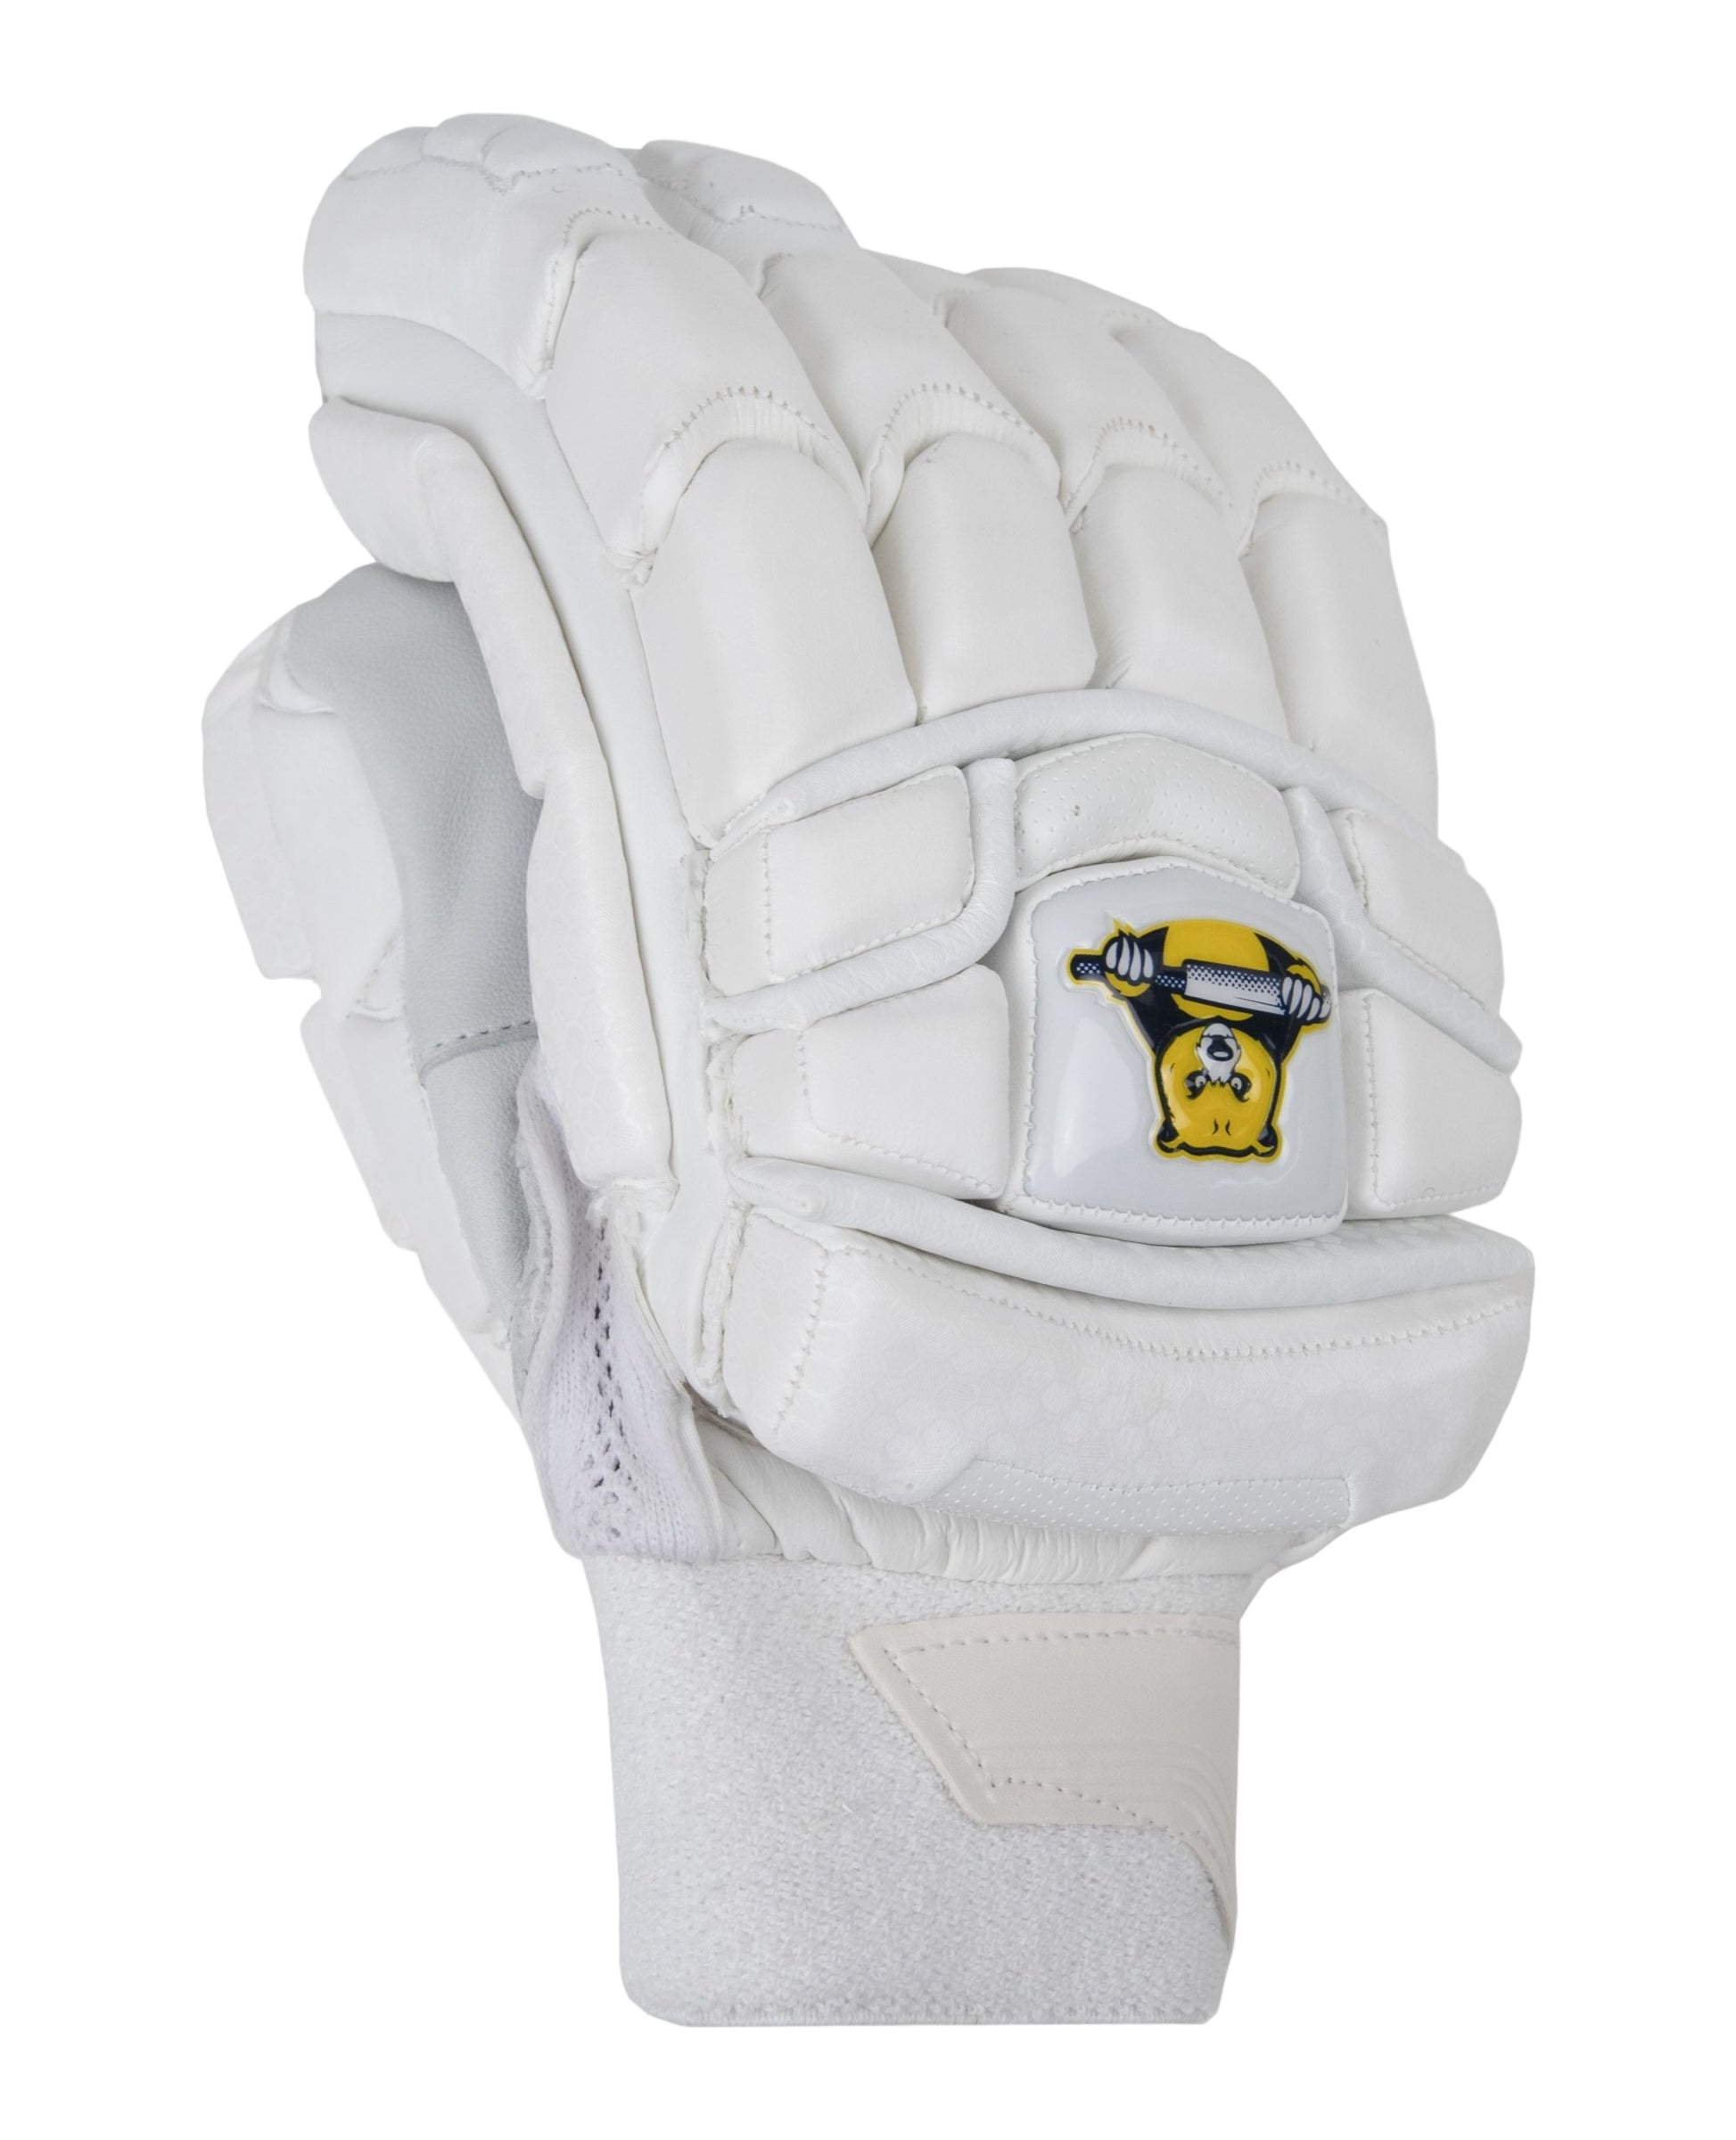 Bear Cricket Players Edition Junior Batting Gloves - The Cricket Store